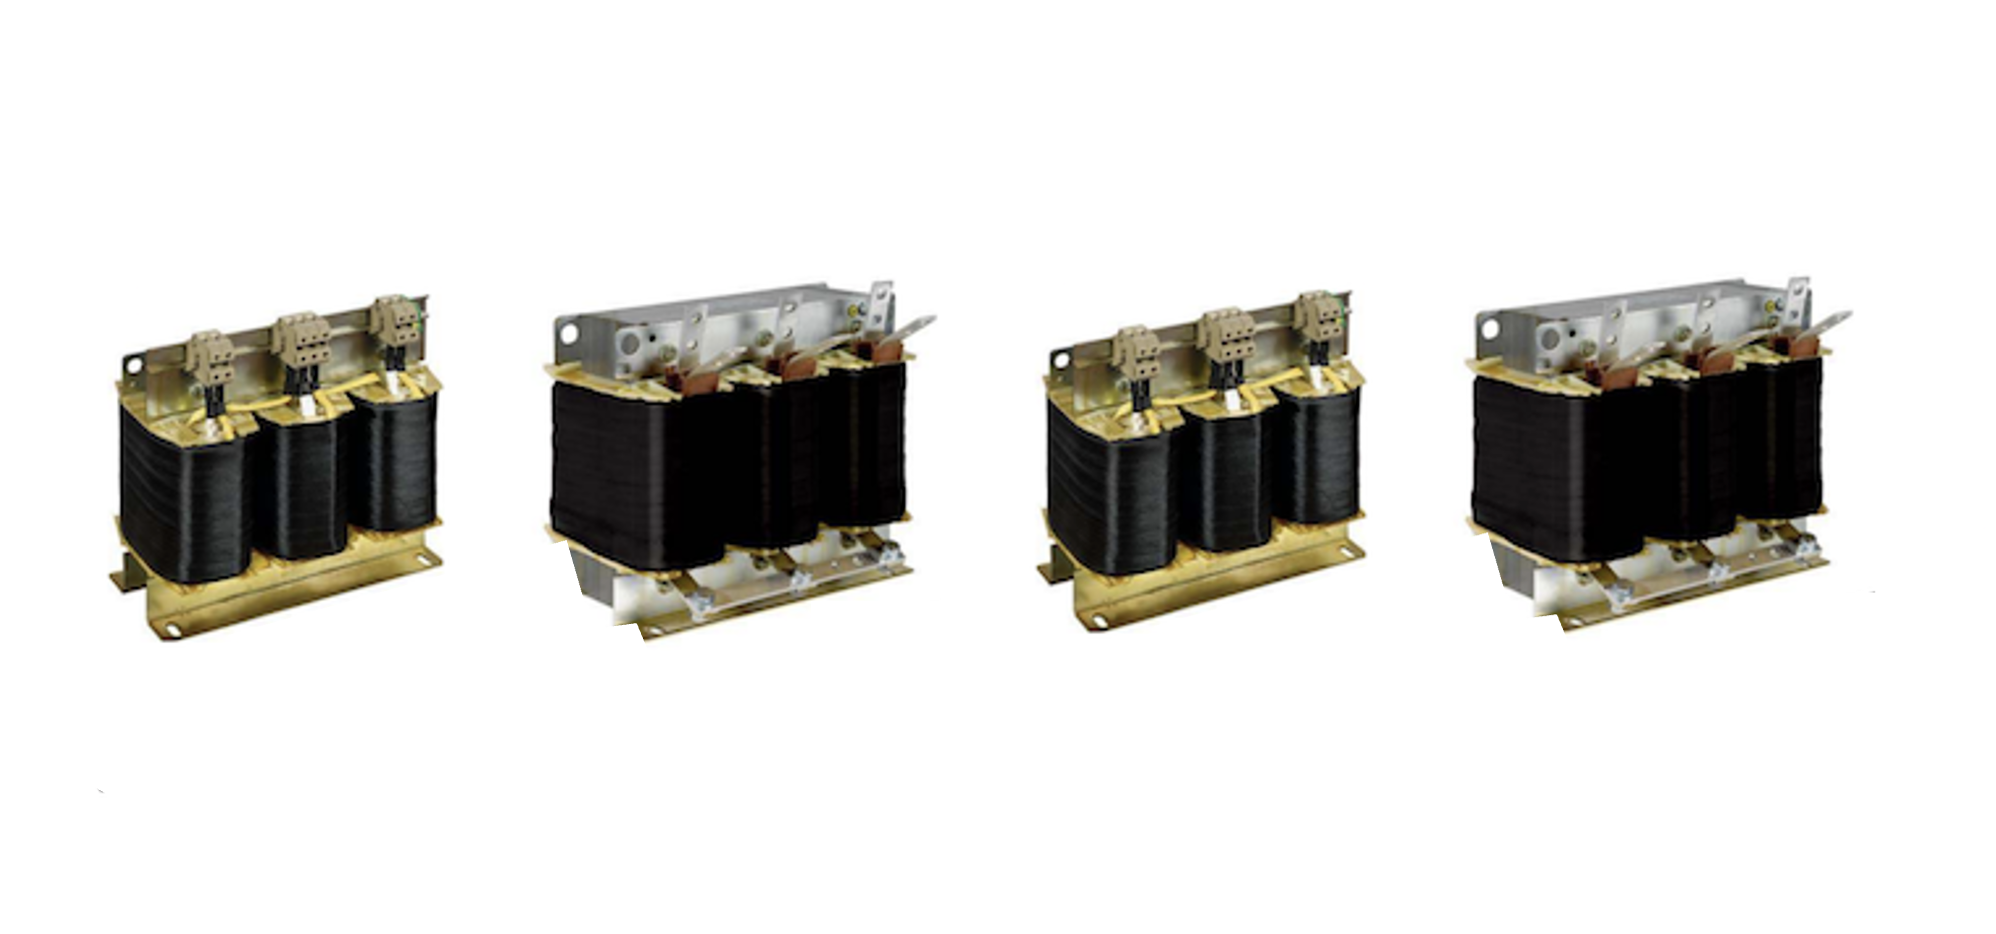 Industrial control auto transformers, black and gold builds and large black devices.